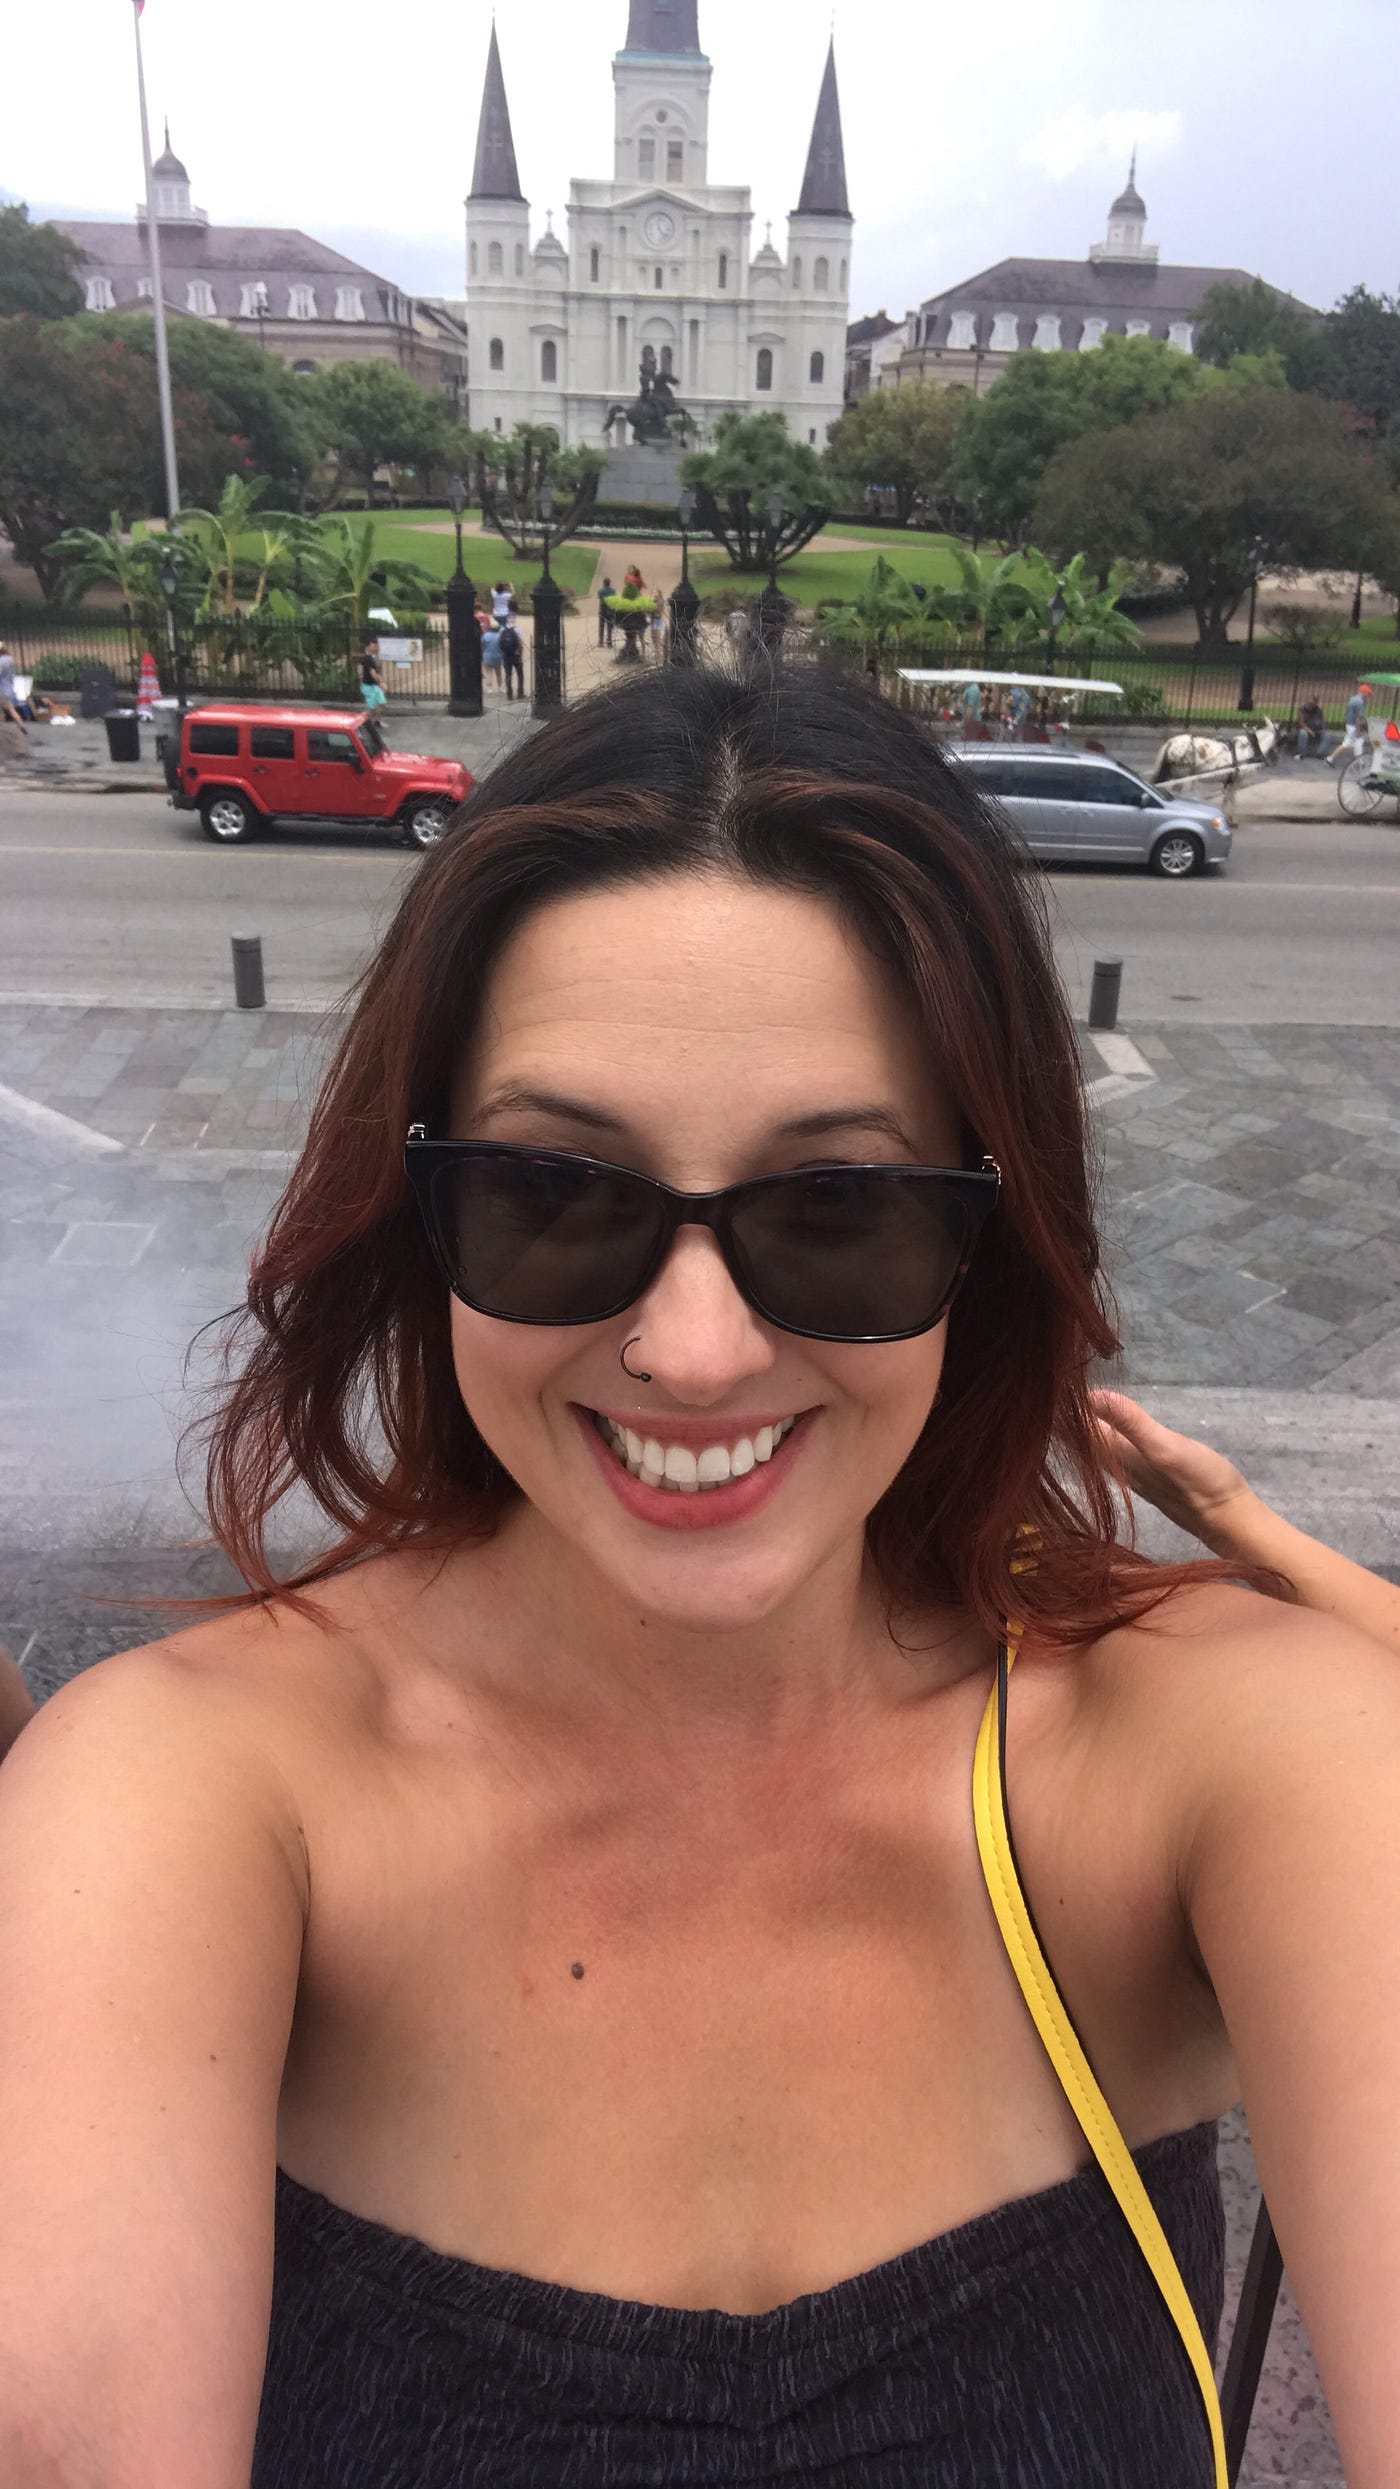 Naughty in Nawlins Trip Highlights (July 2019) Day 5 by Sex Ed for the Modern Bed Medium